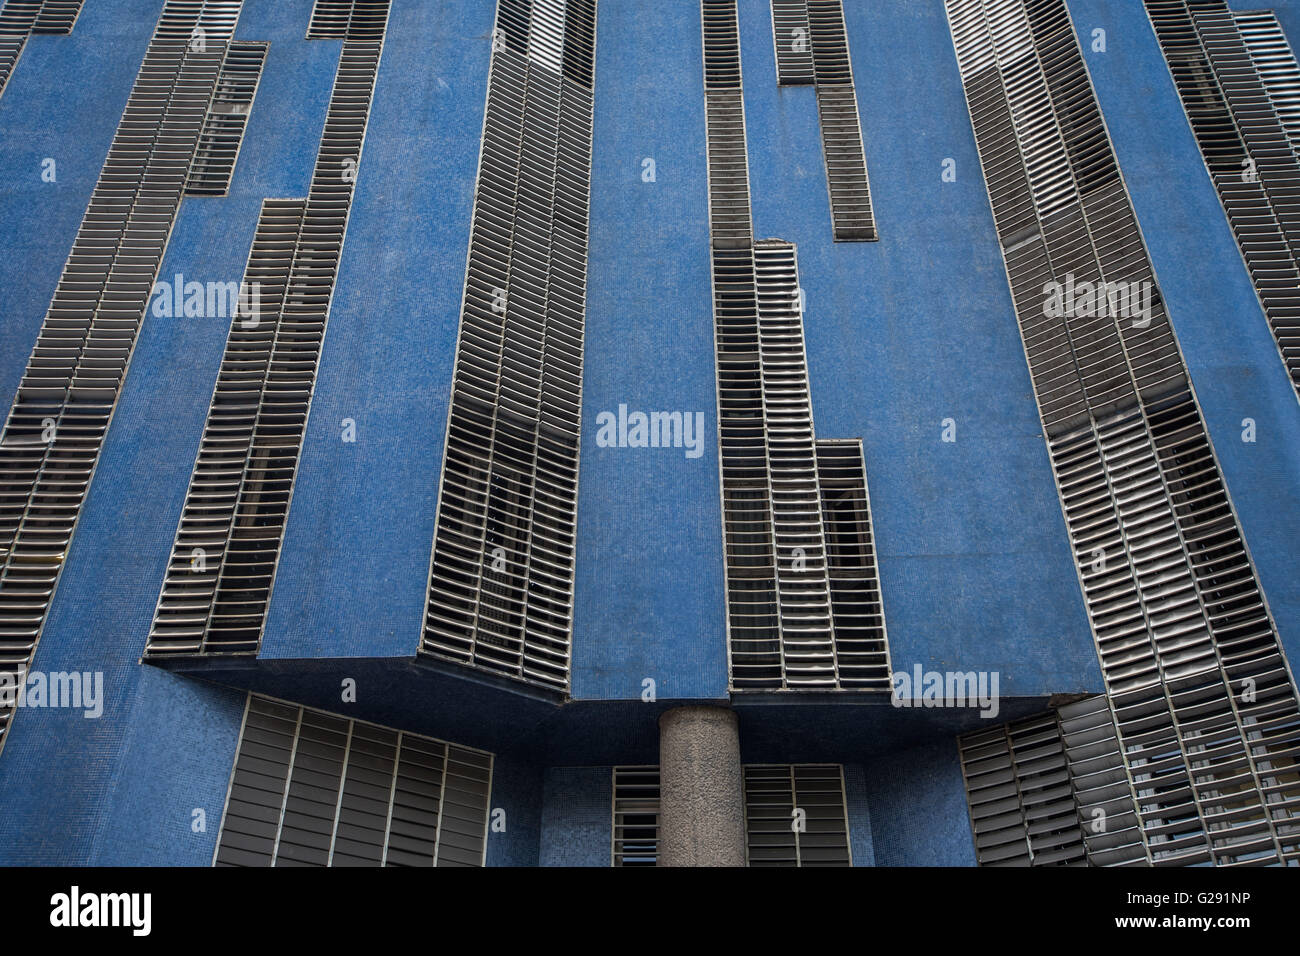 Interesting building architecture comprised of blue panels and metallic grid work Stock Photo